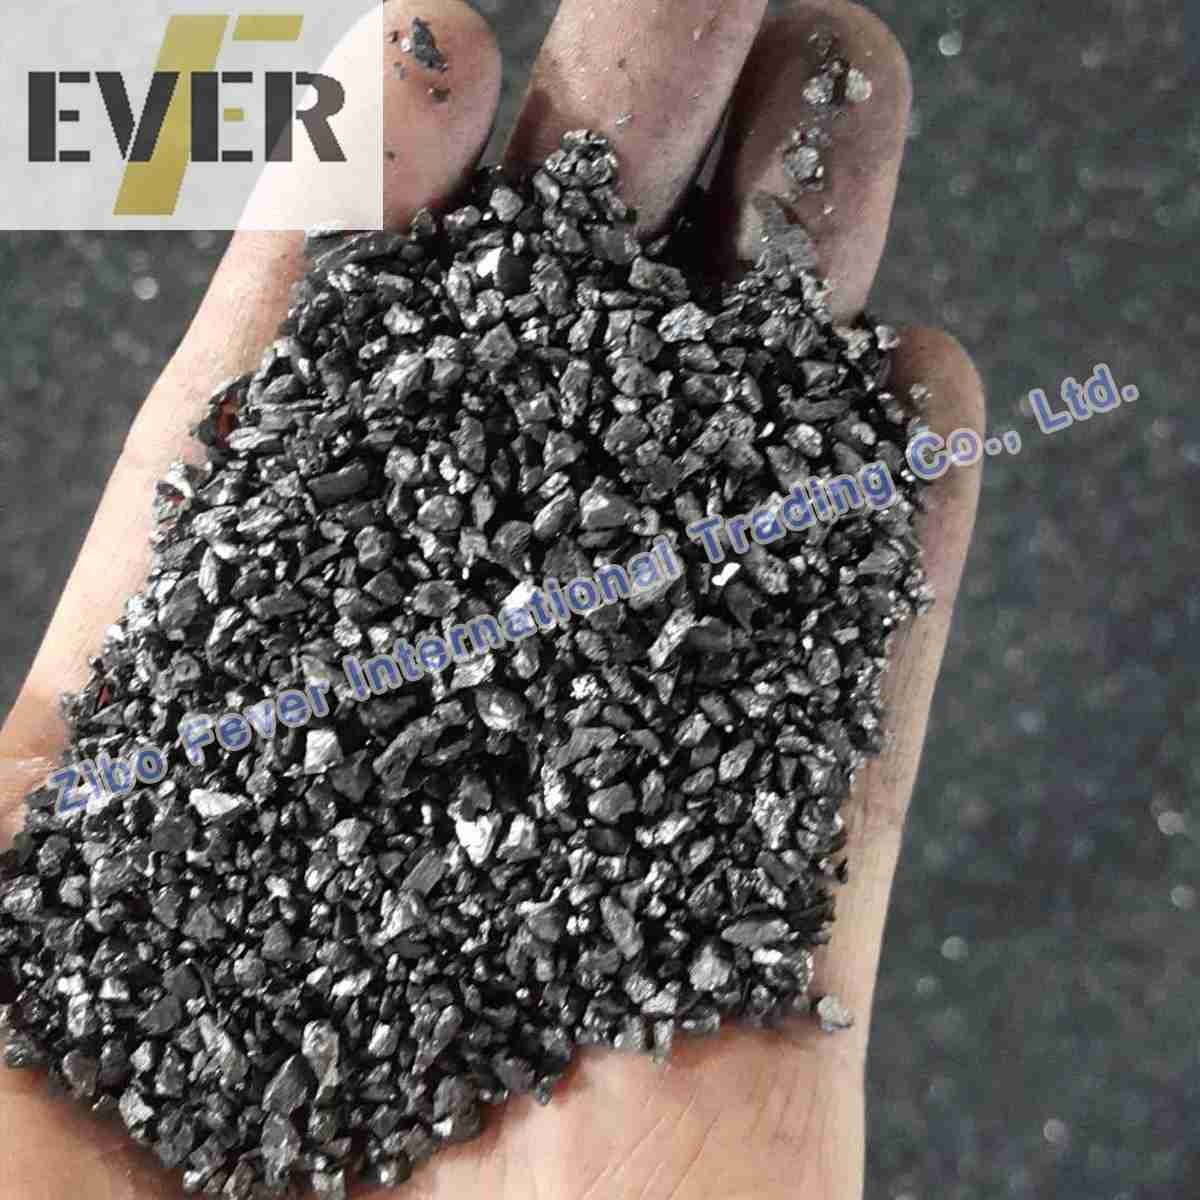 Quality Foundry Industry Calcined Petroleum Anthracite Charcoal 8mm 1% Ash for sale